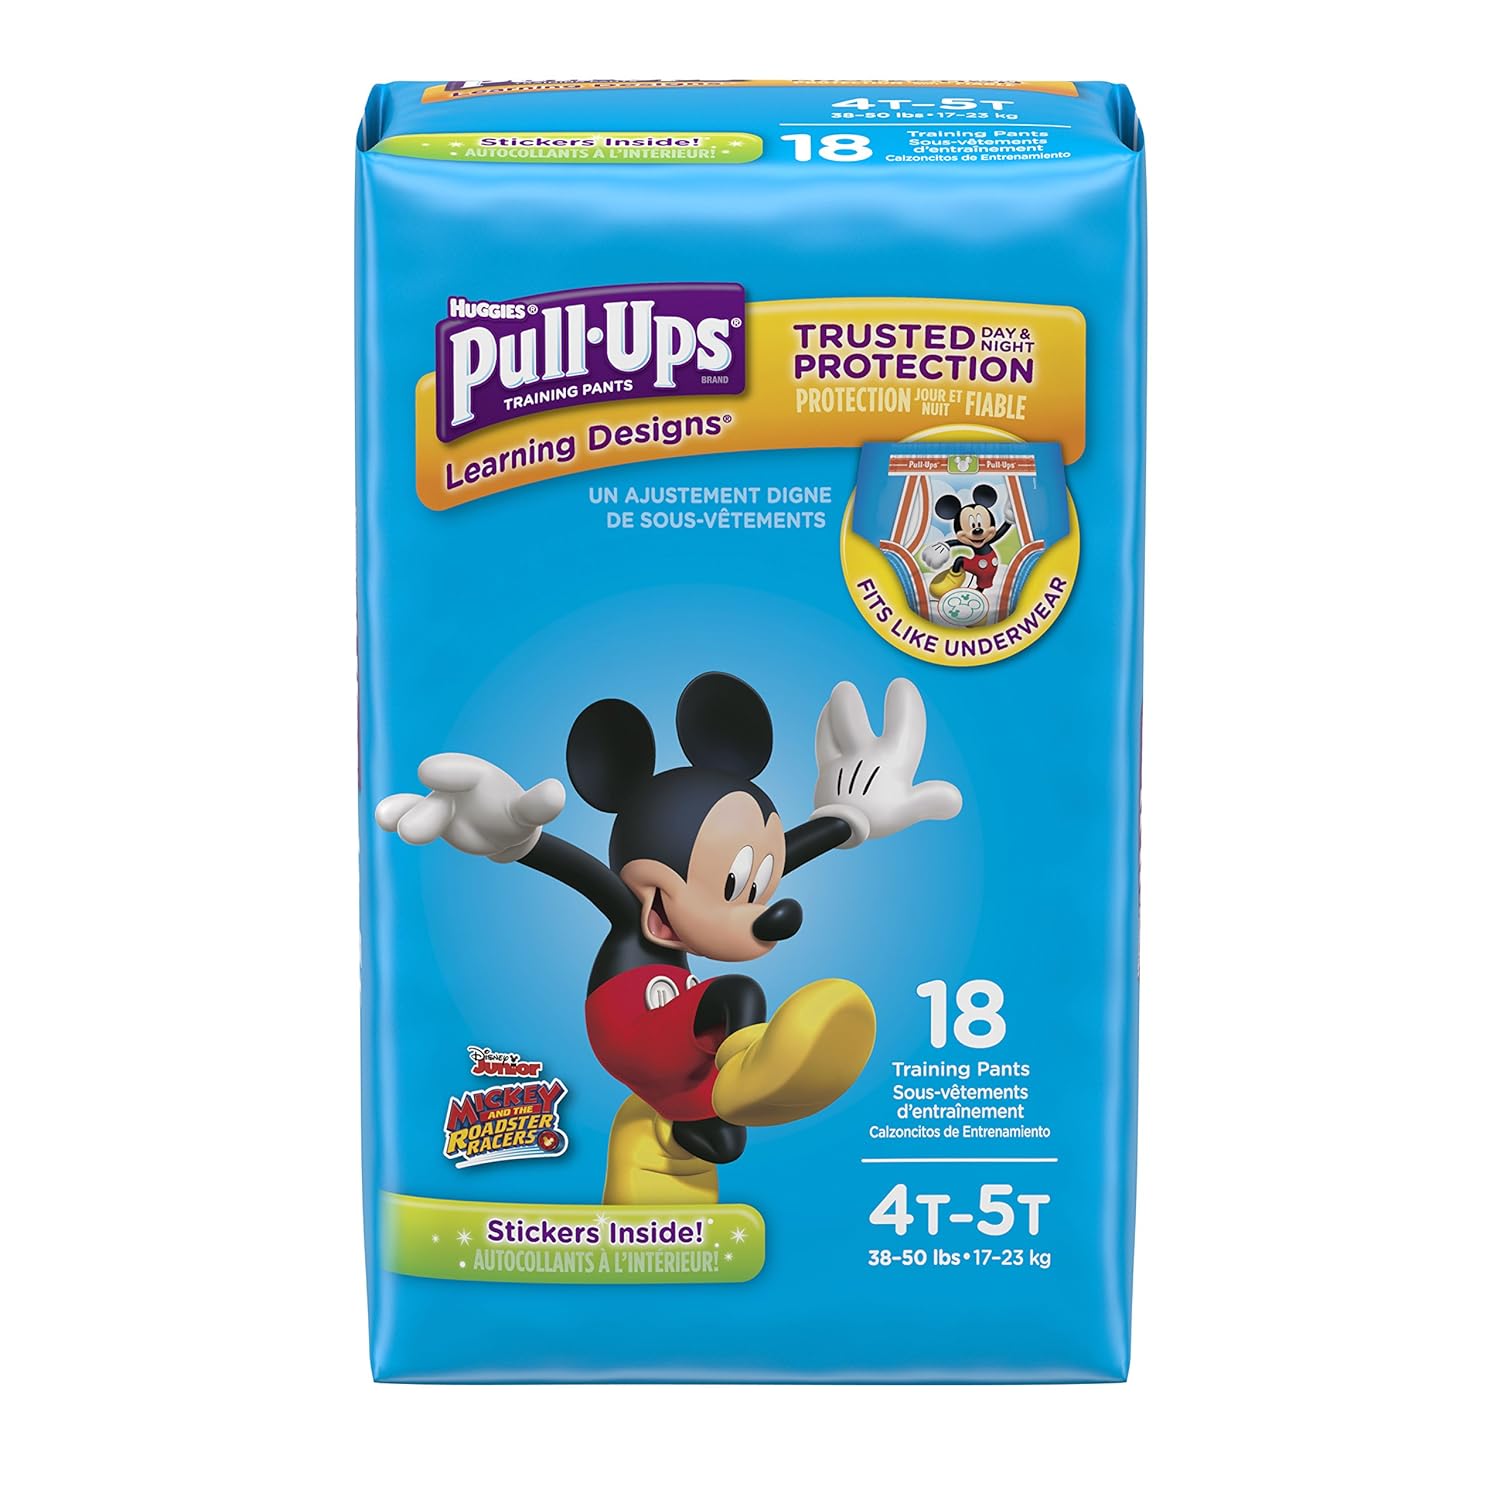 Pull-Ups Learning Designs Potty Training Pants for Boys, 4T-5T ( lb.), 18 Ct. (Packaging May Vary) - image 1 of 10